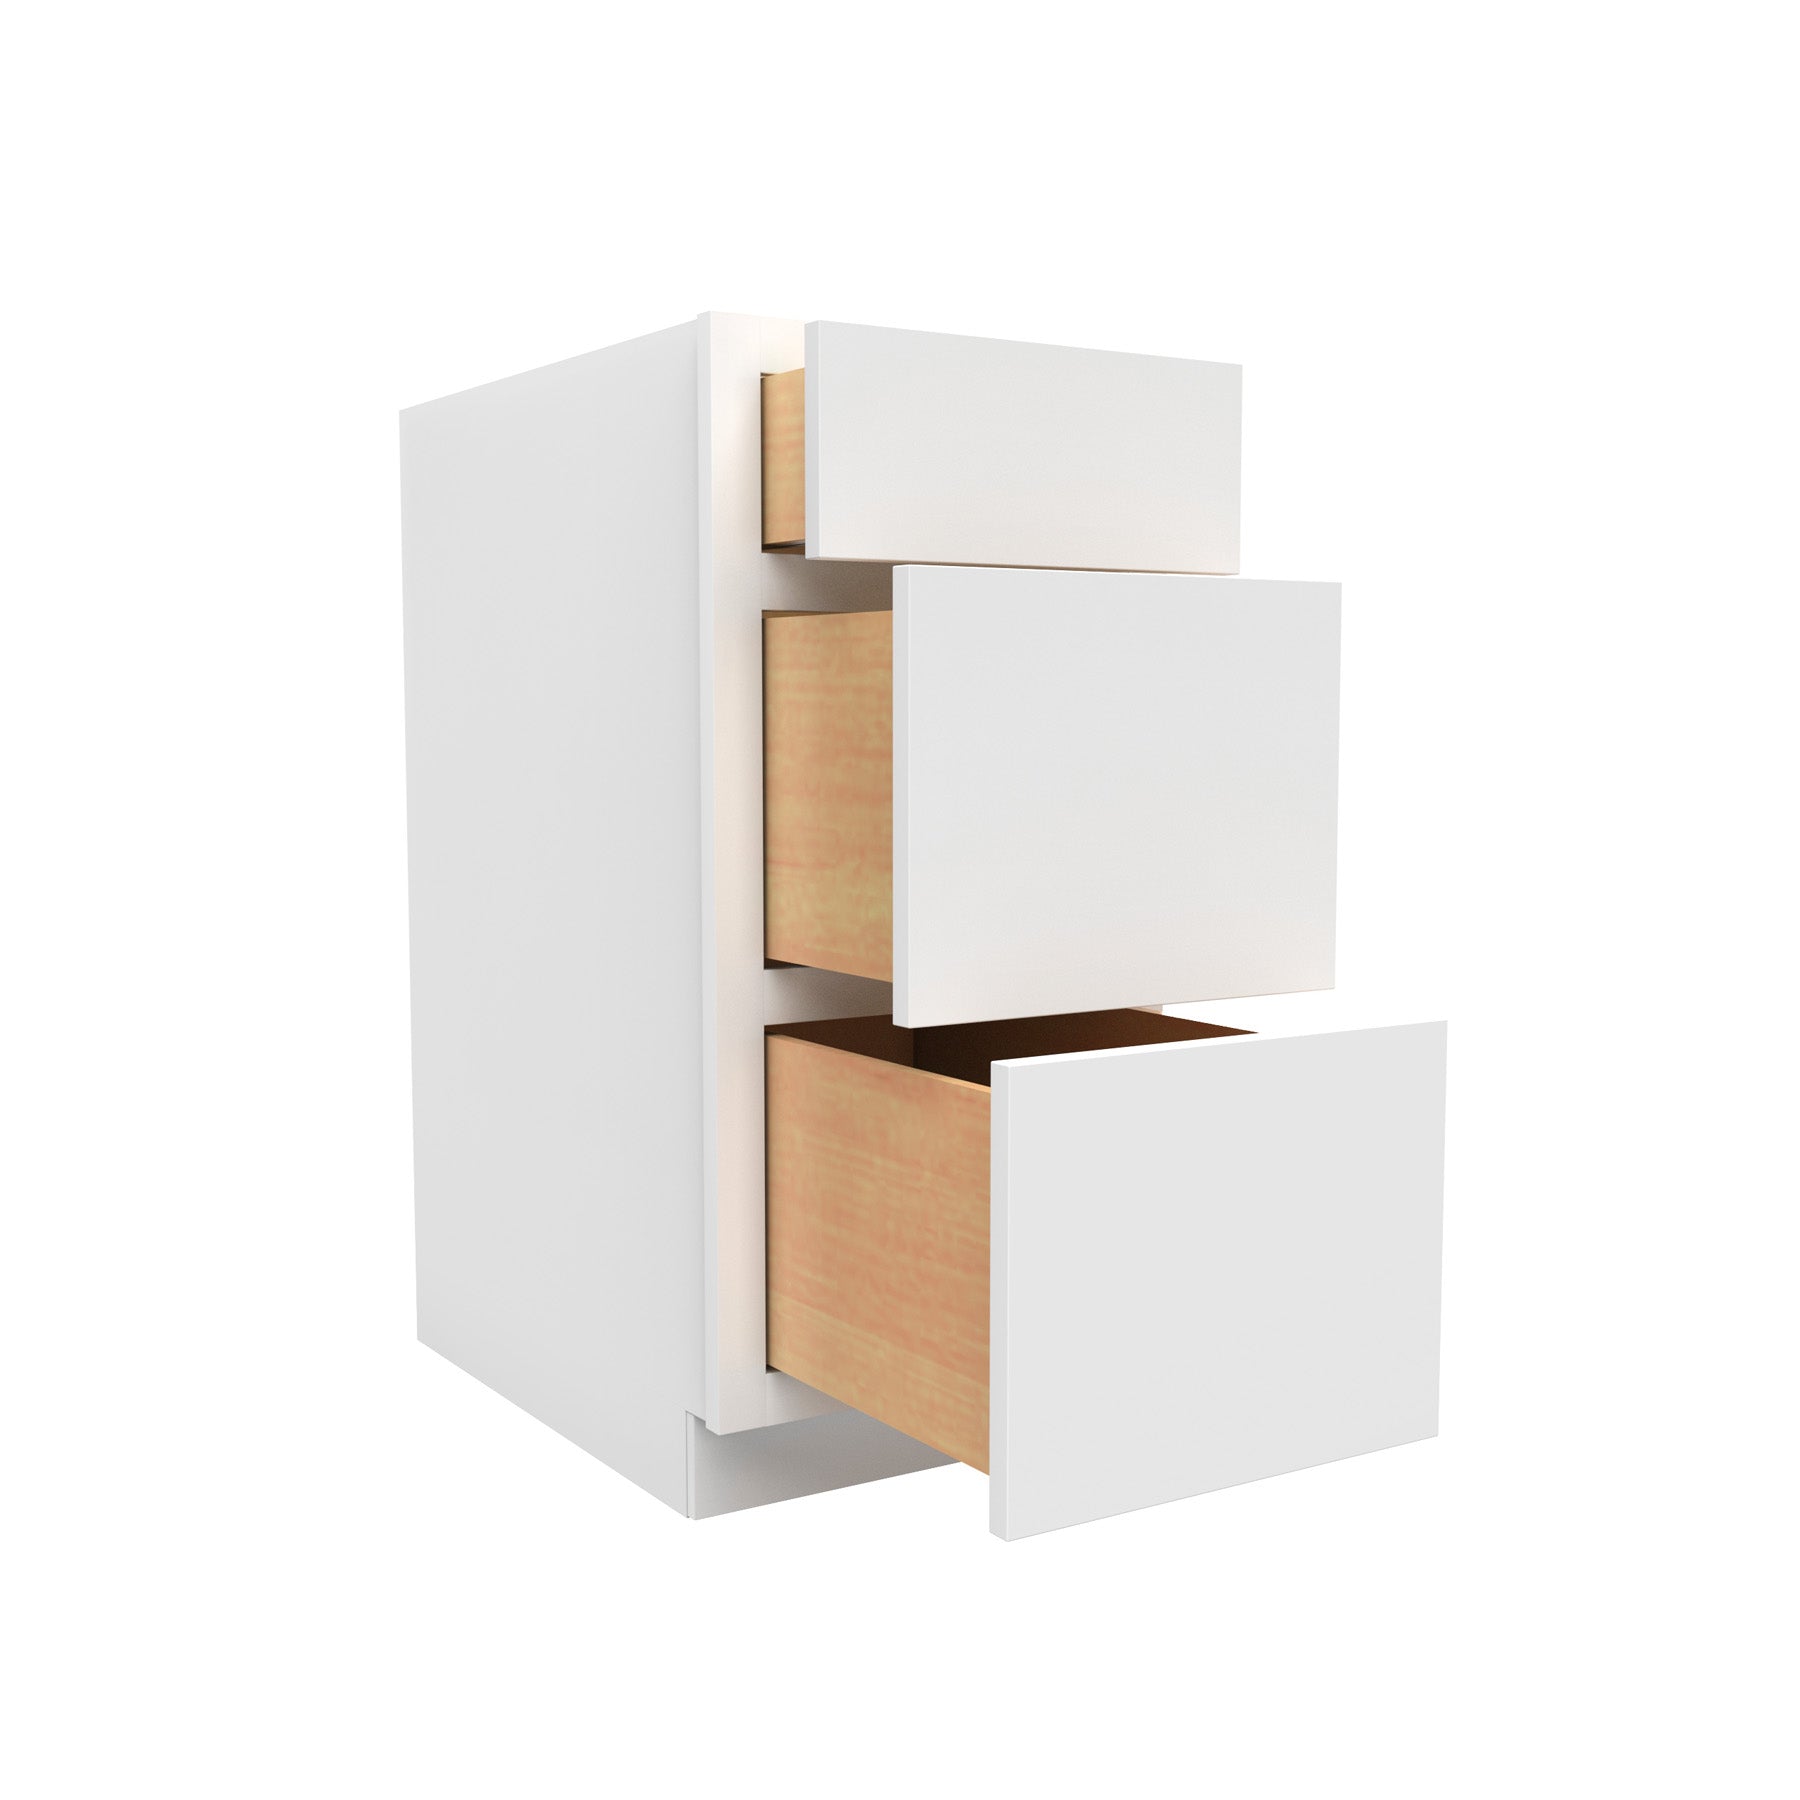 15 Inch Wide 3 Drawer Base Vanity Cabinet - Handicap Accessible - Luxor White Shaker - Ready To Assemble, 15"W x 32.5"H x 21"D